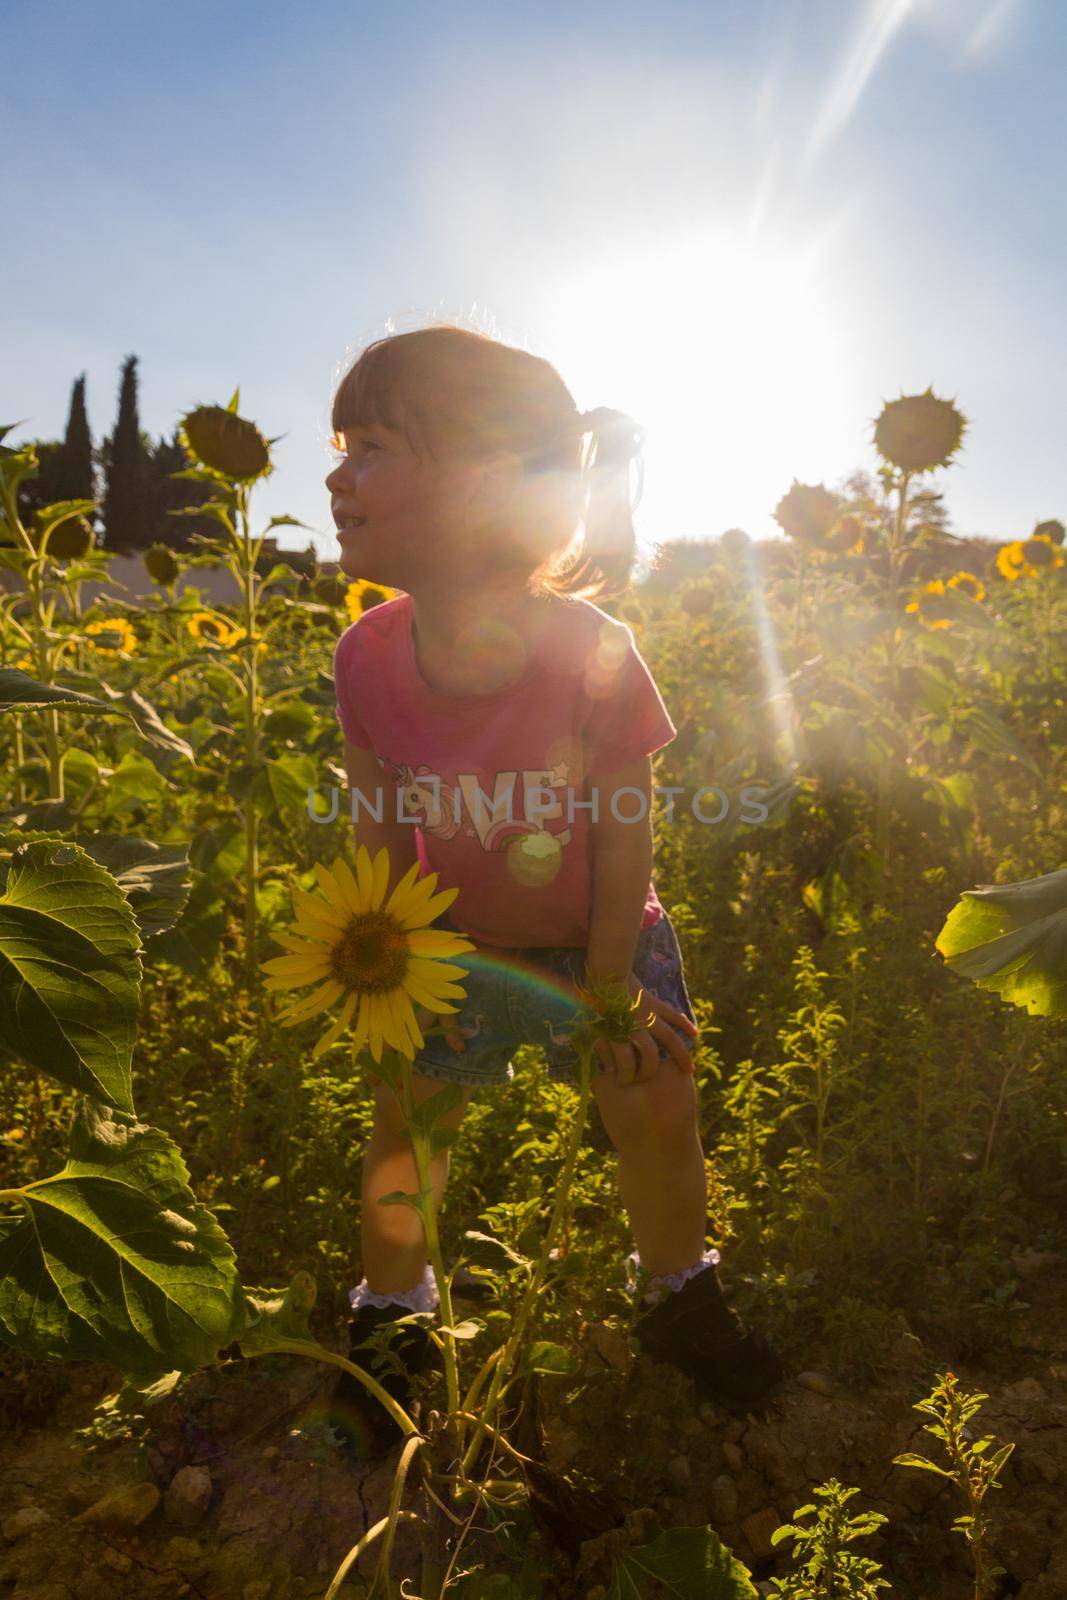 A cute baby girl in a pink t-shirt and shorts standing in a sunflowers field and smiling in the sunset against the sky